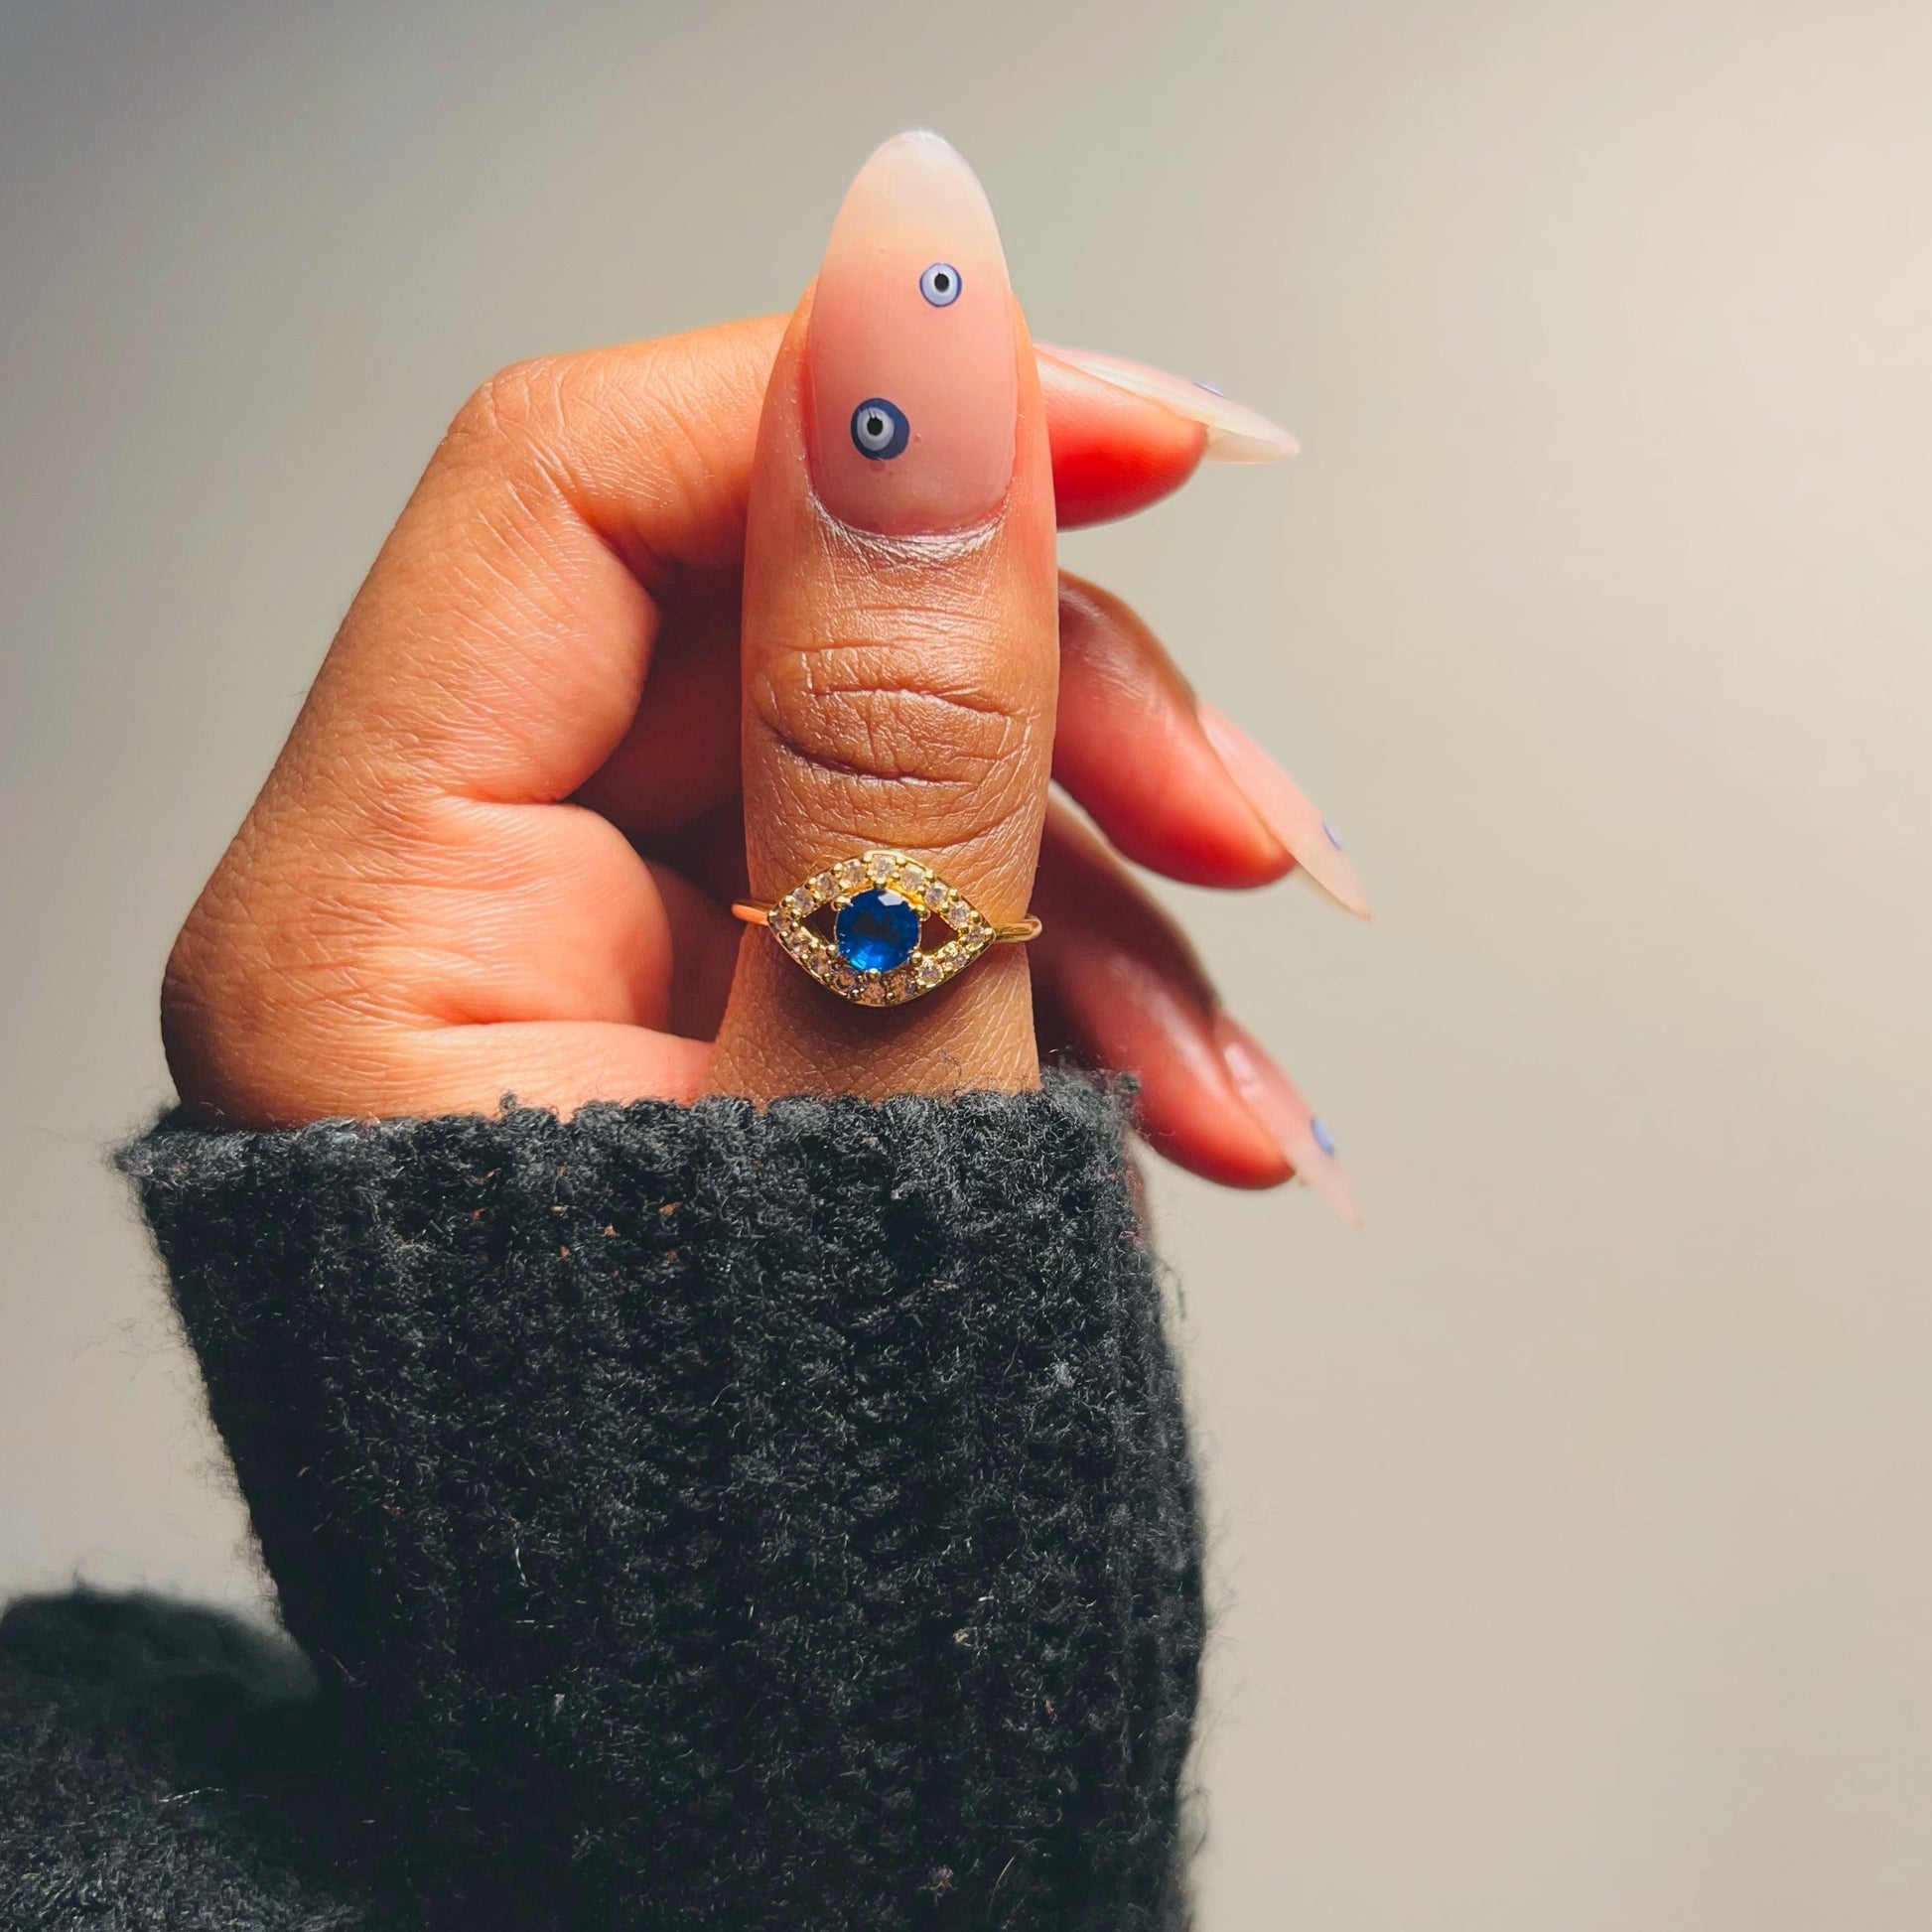 Evil Eye Ring. Custom-made Evil Eye Ring that is adjustable, 18k gold Plated, made with shiny Rhinestones and is water-resistant. Evil eye jewelry. Evil eye ring. Evil eye protection. 